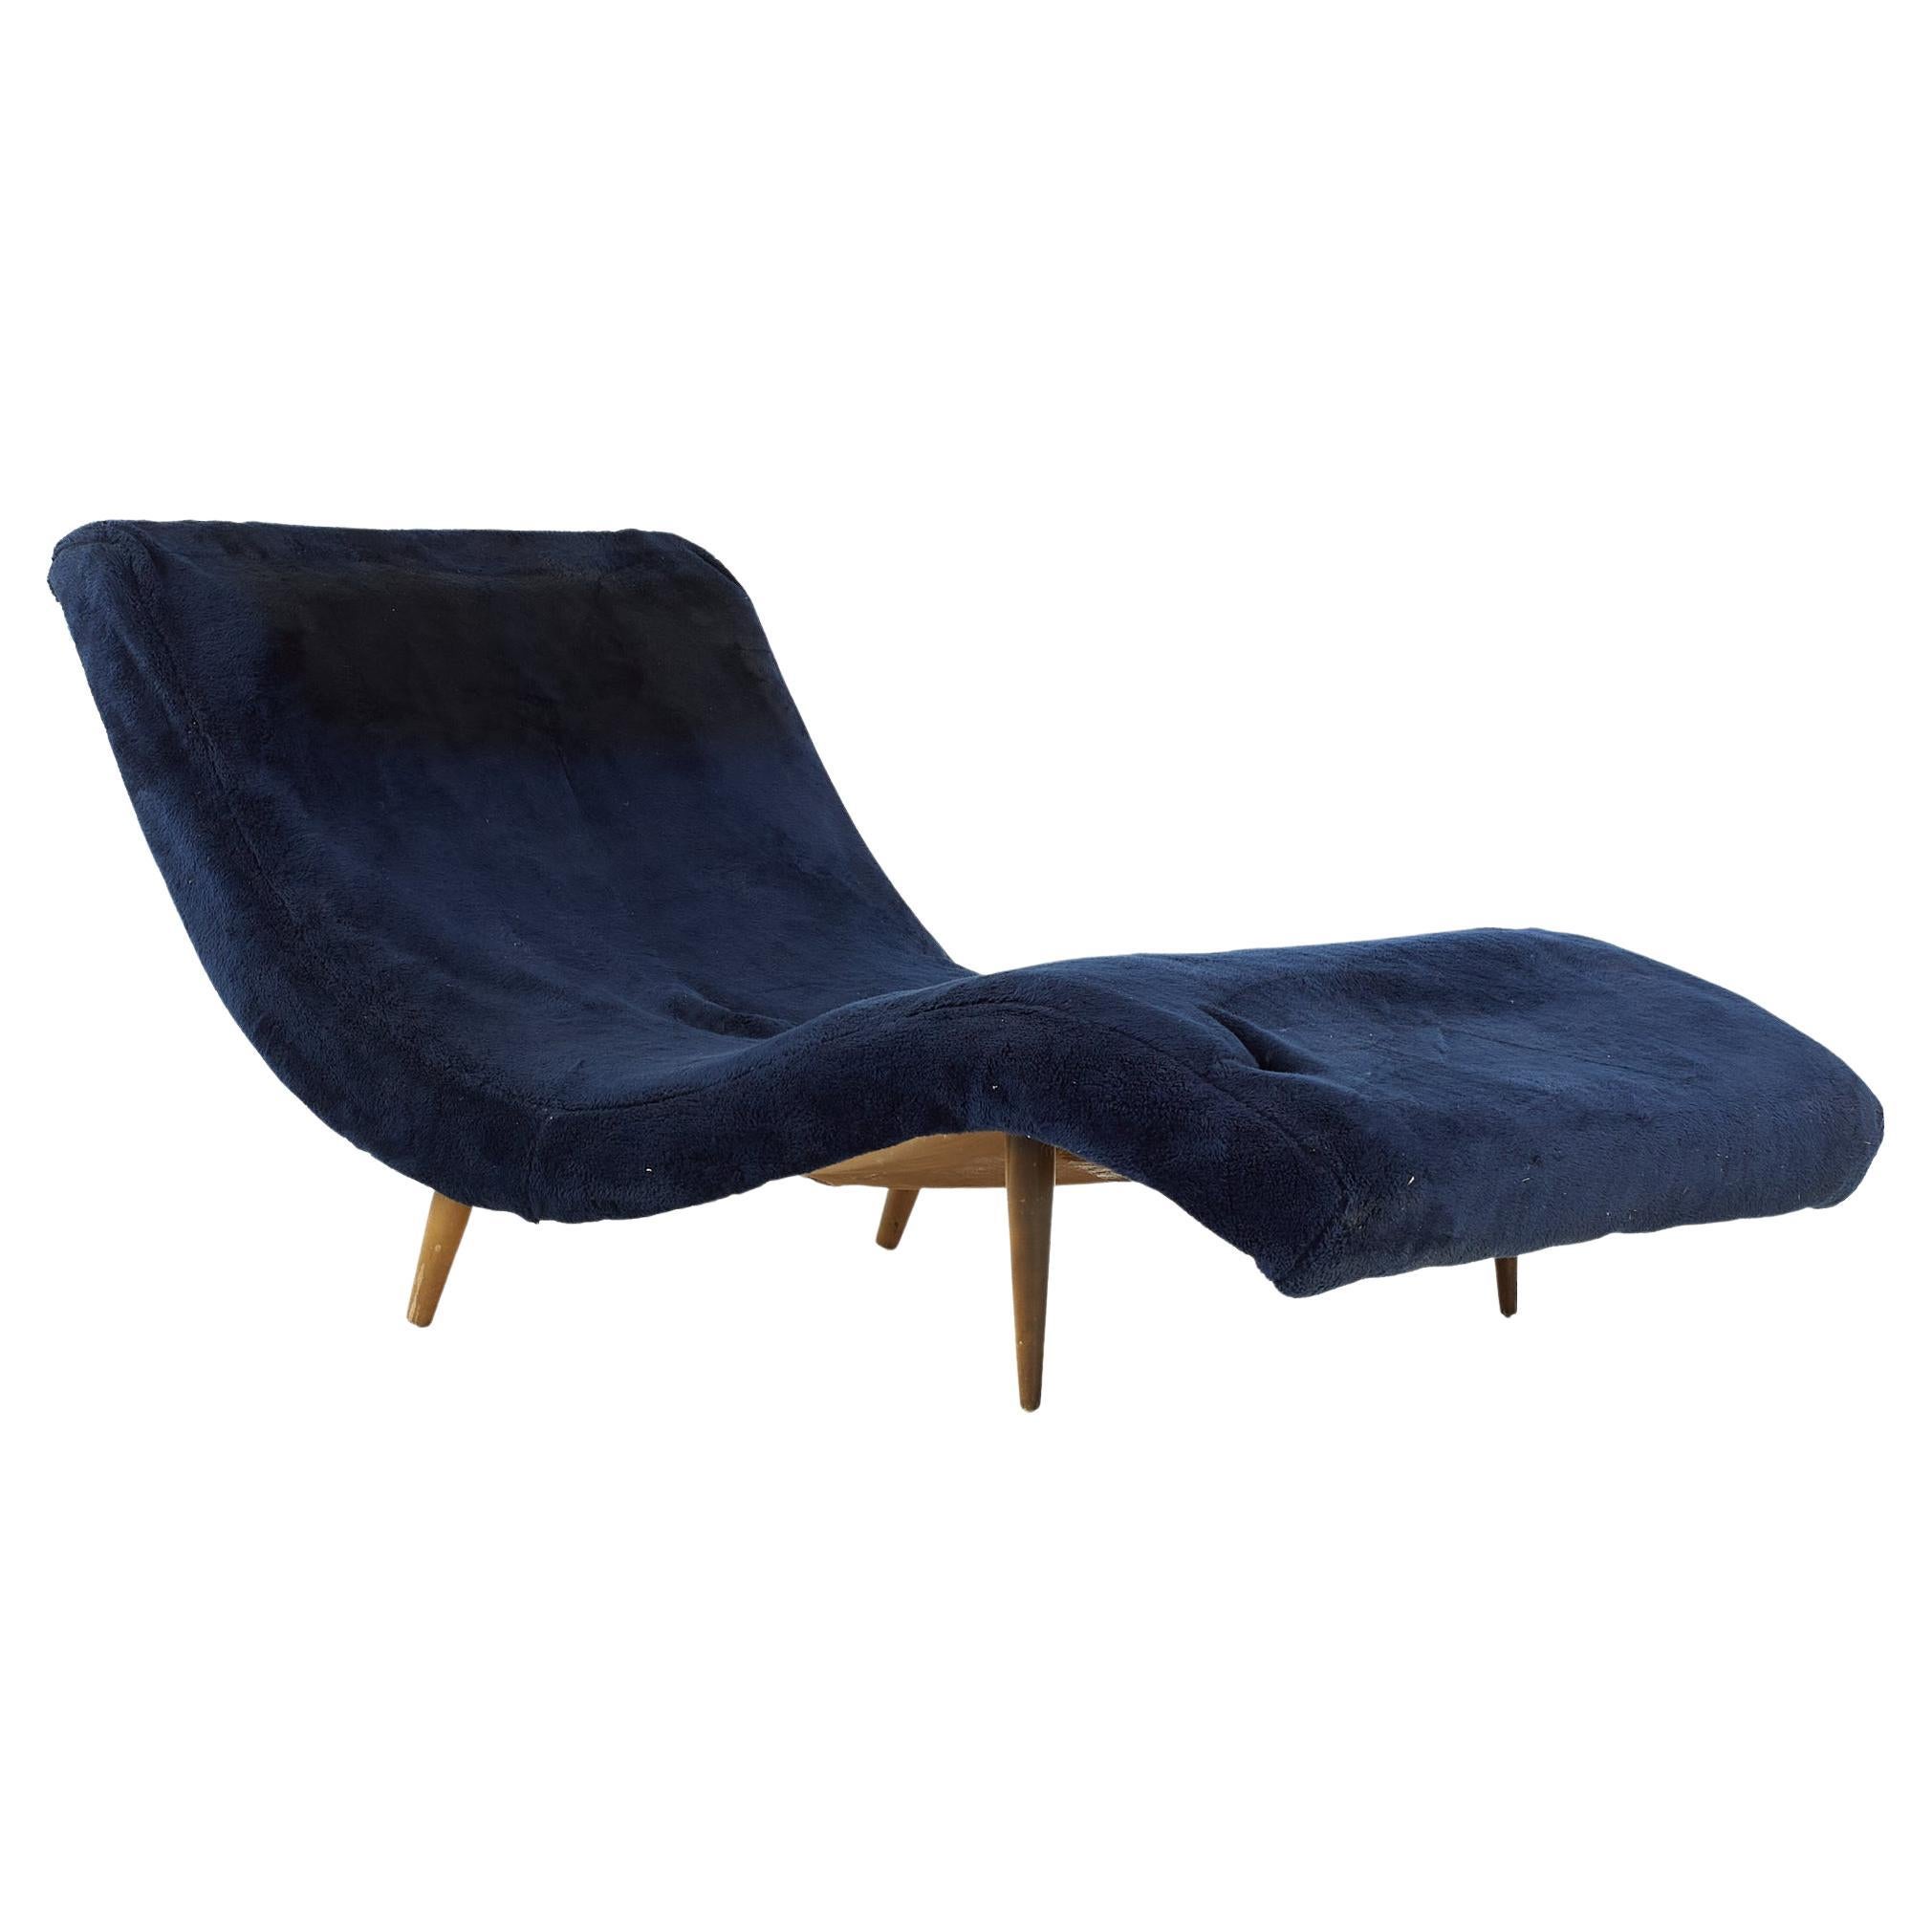 Adrian Pearsall for Craft Associates Midcentury Wave Chaise